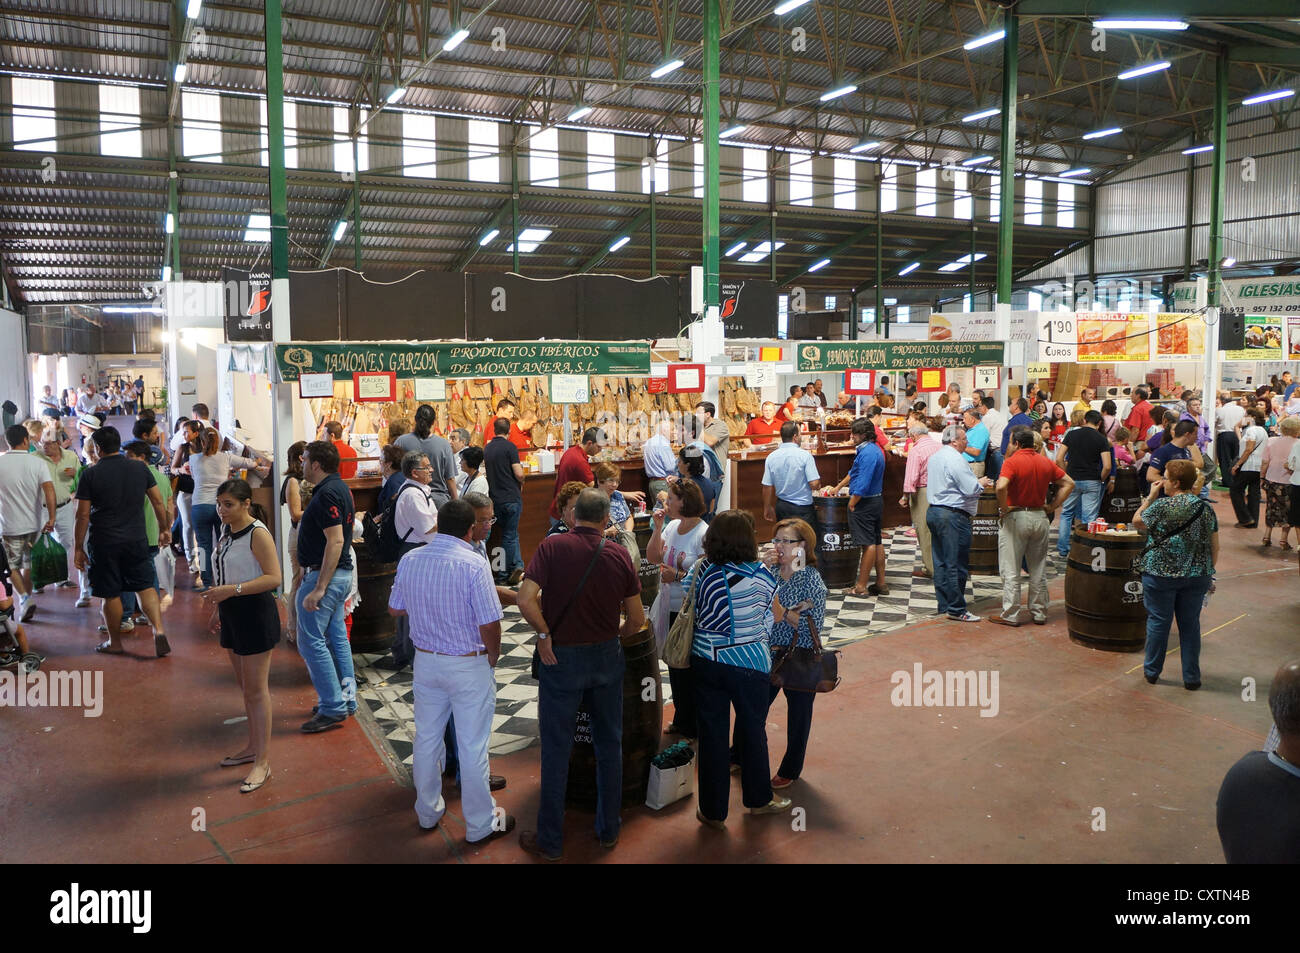 the participantes visit fair International Livestock agro-industrial exhibition, Area Agro-Food Products, at Zafra, Spain Stock Photo